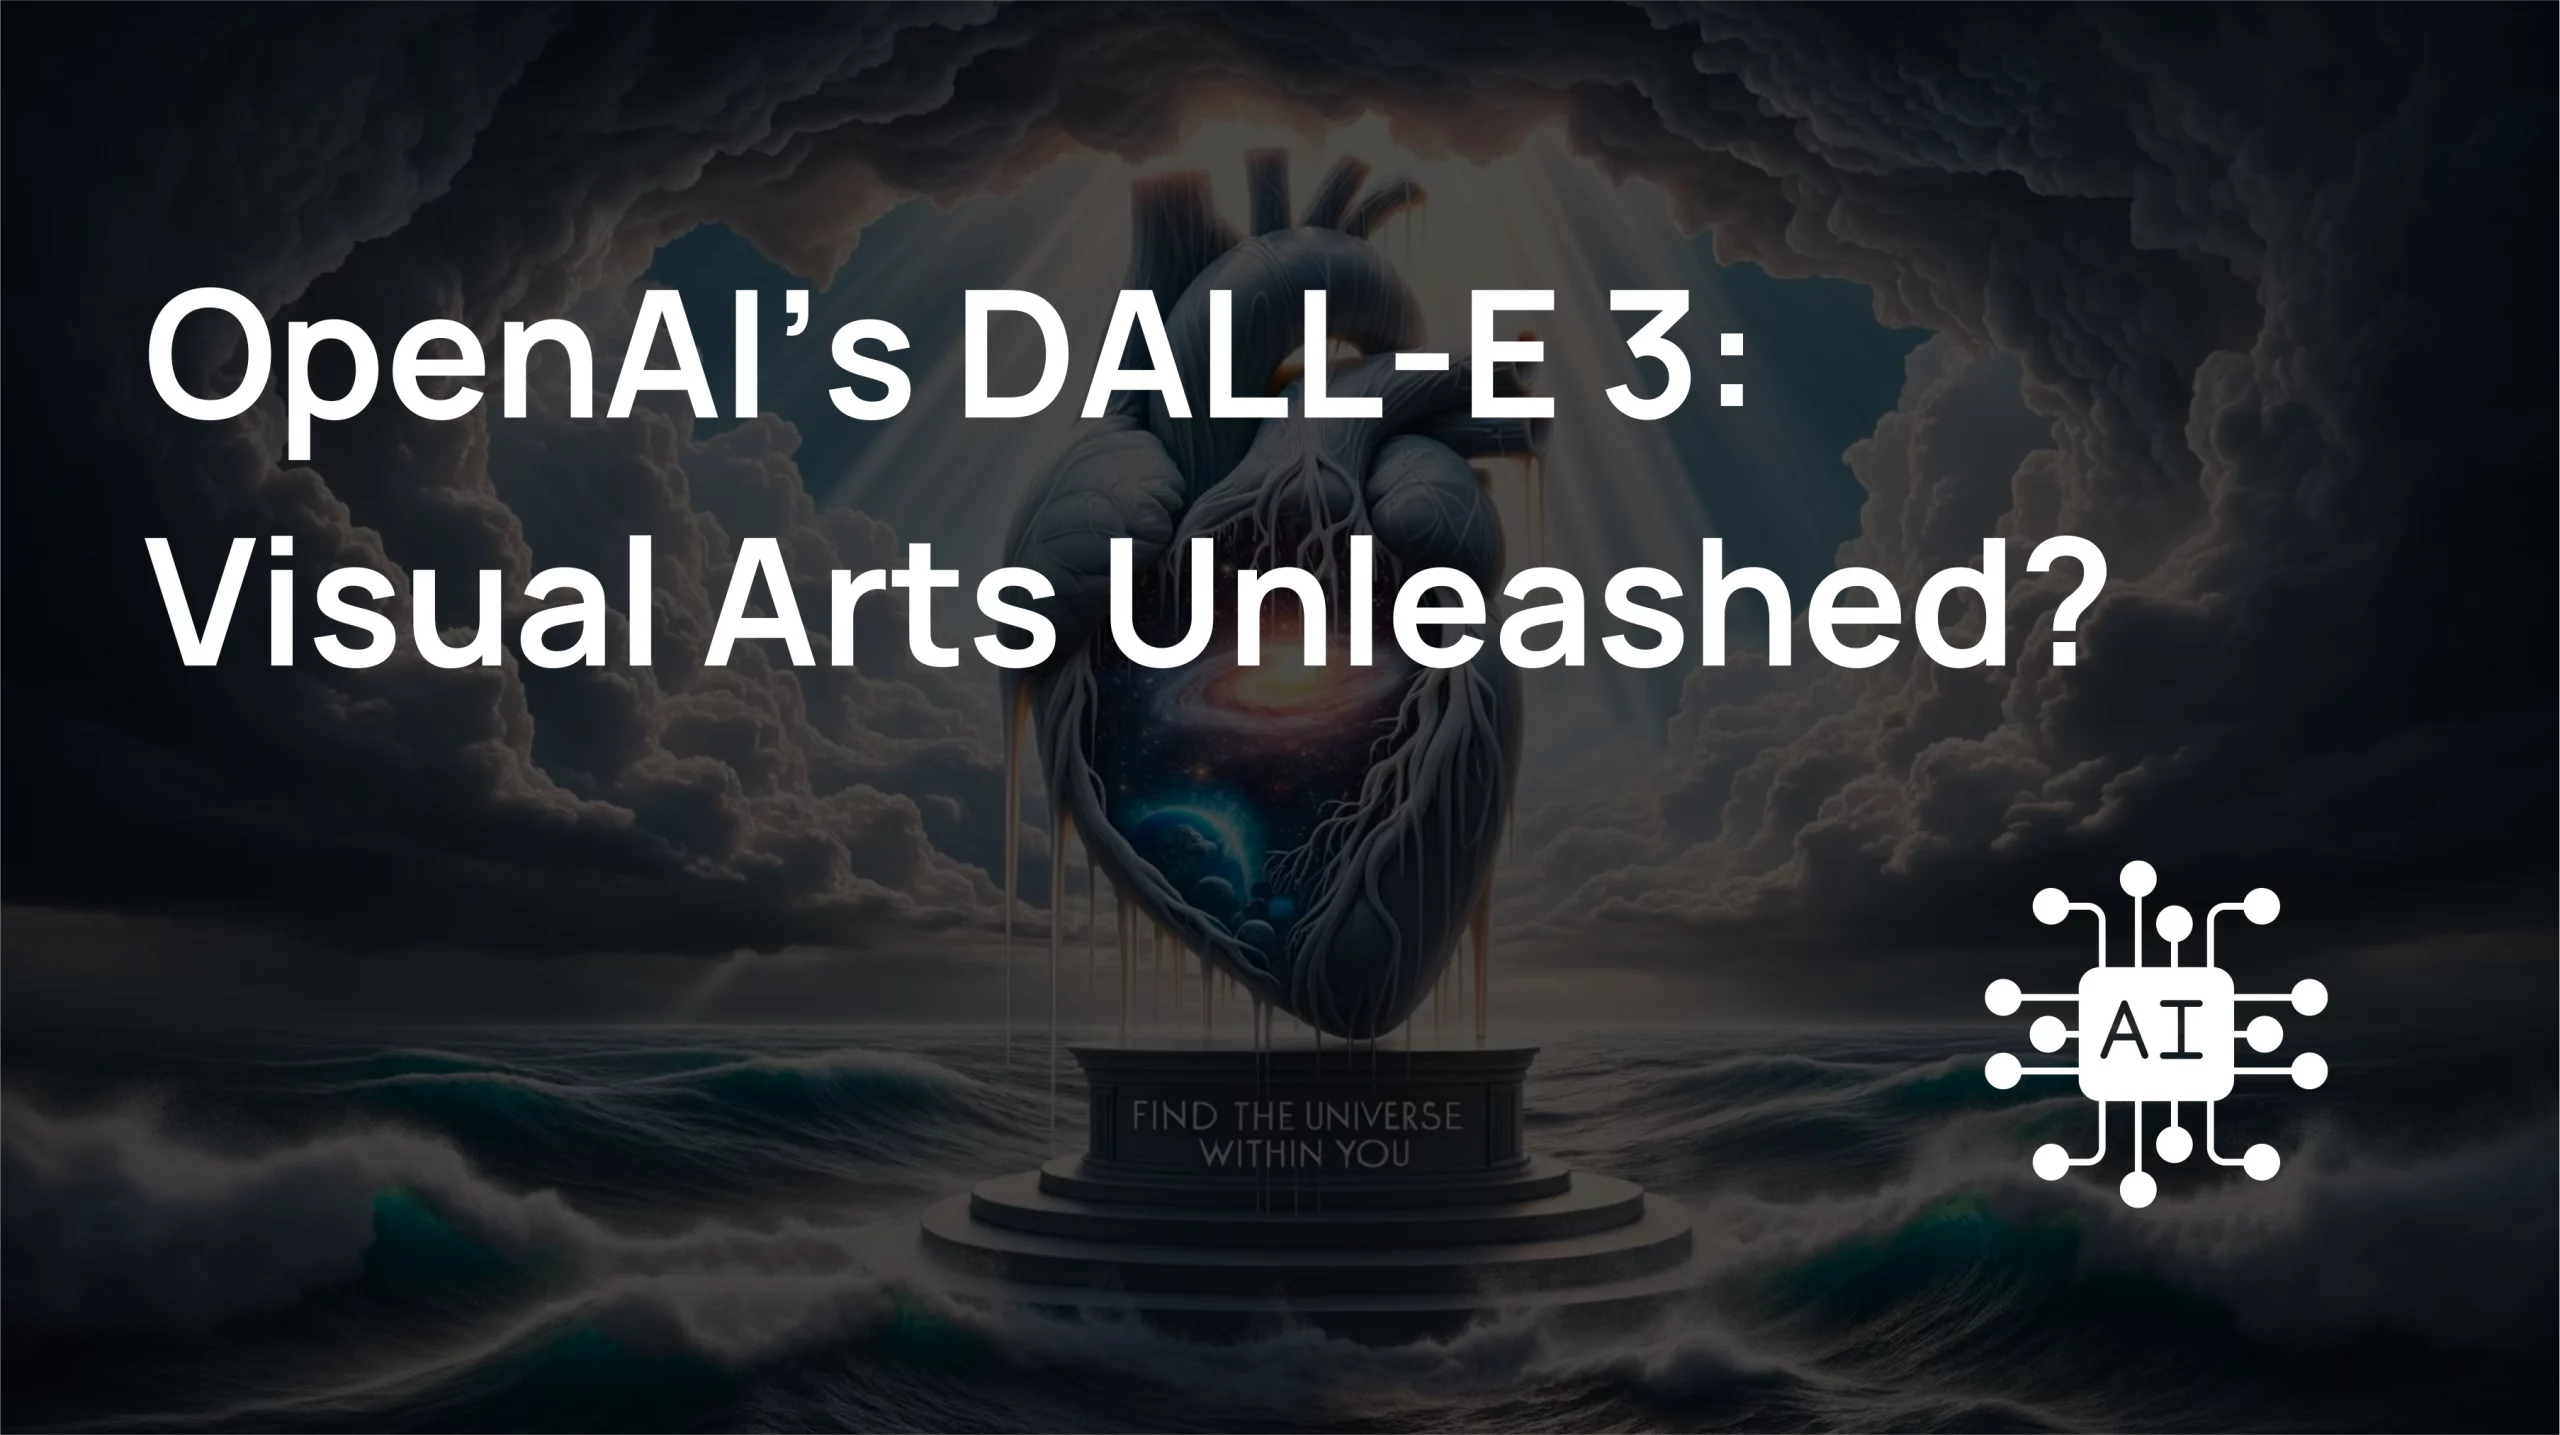 DALL-E 3, developed by OpenAI, can generate highly detailed and realistic images from written prompts.